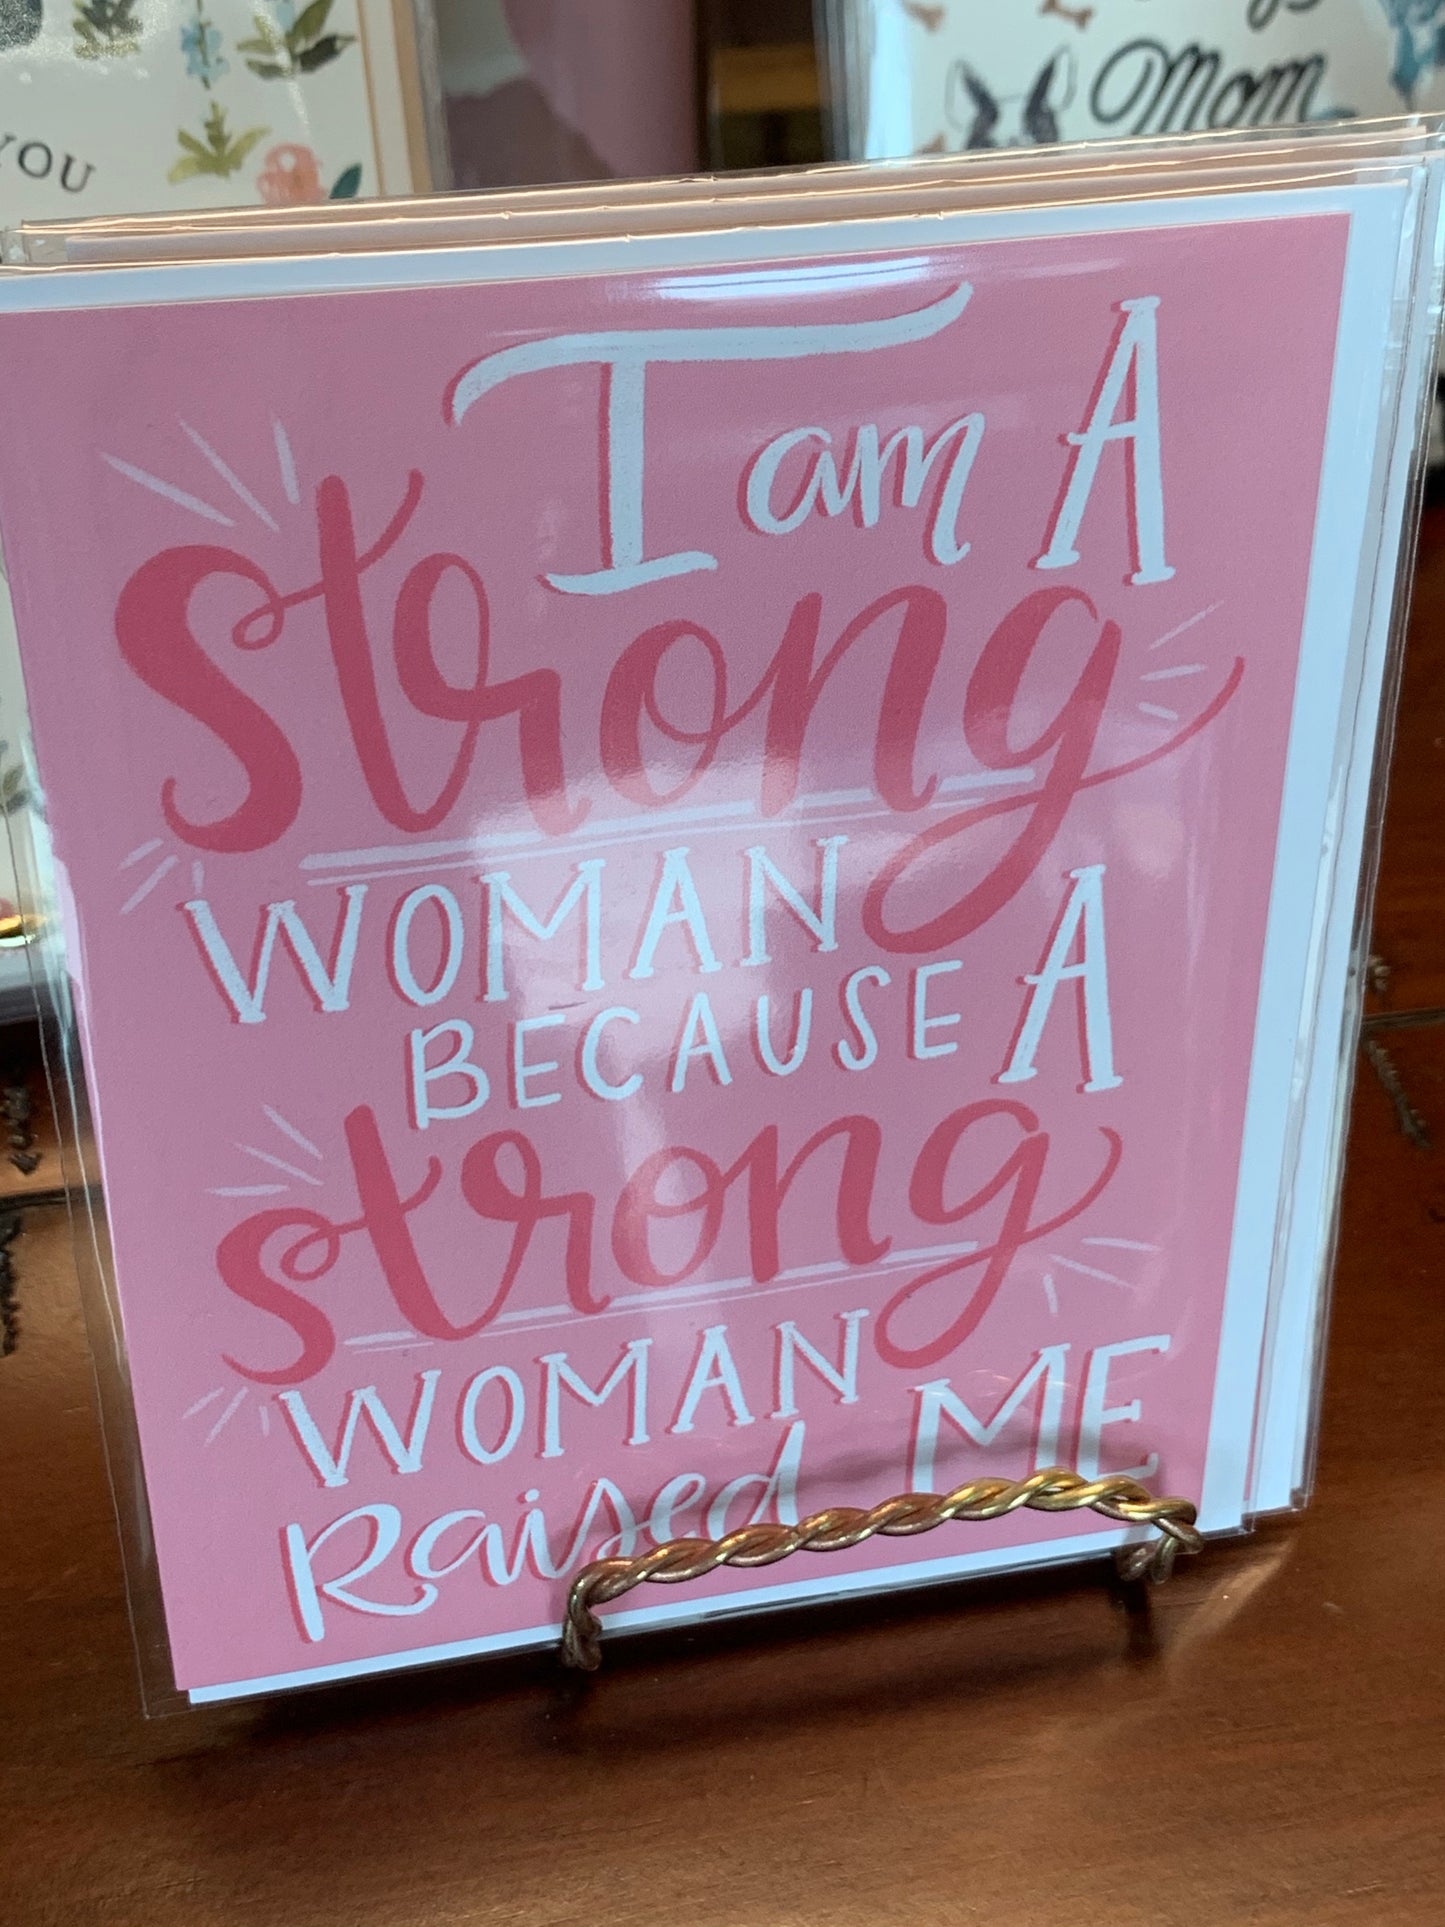 Strong Woman raised me